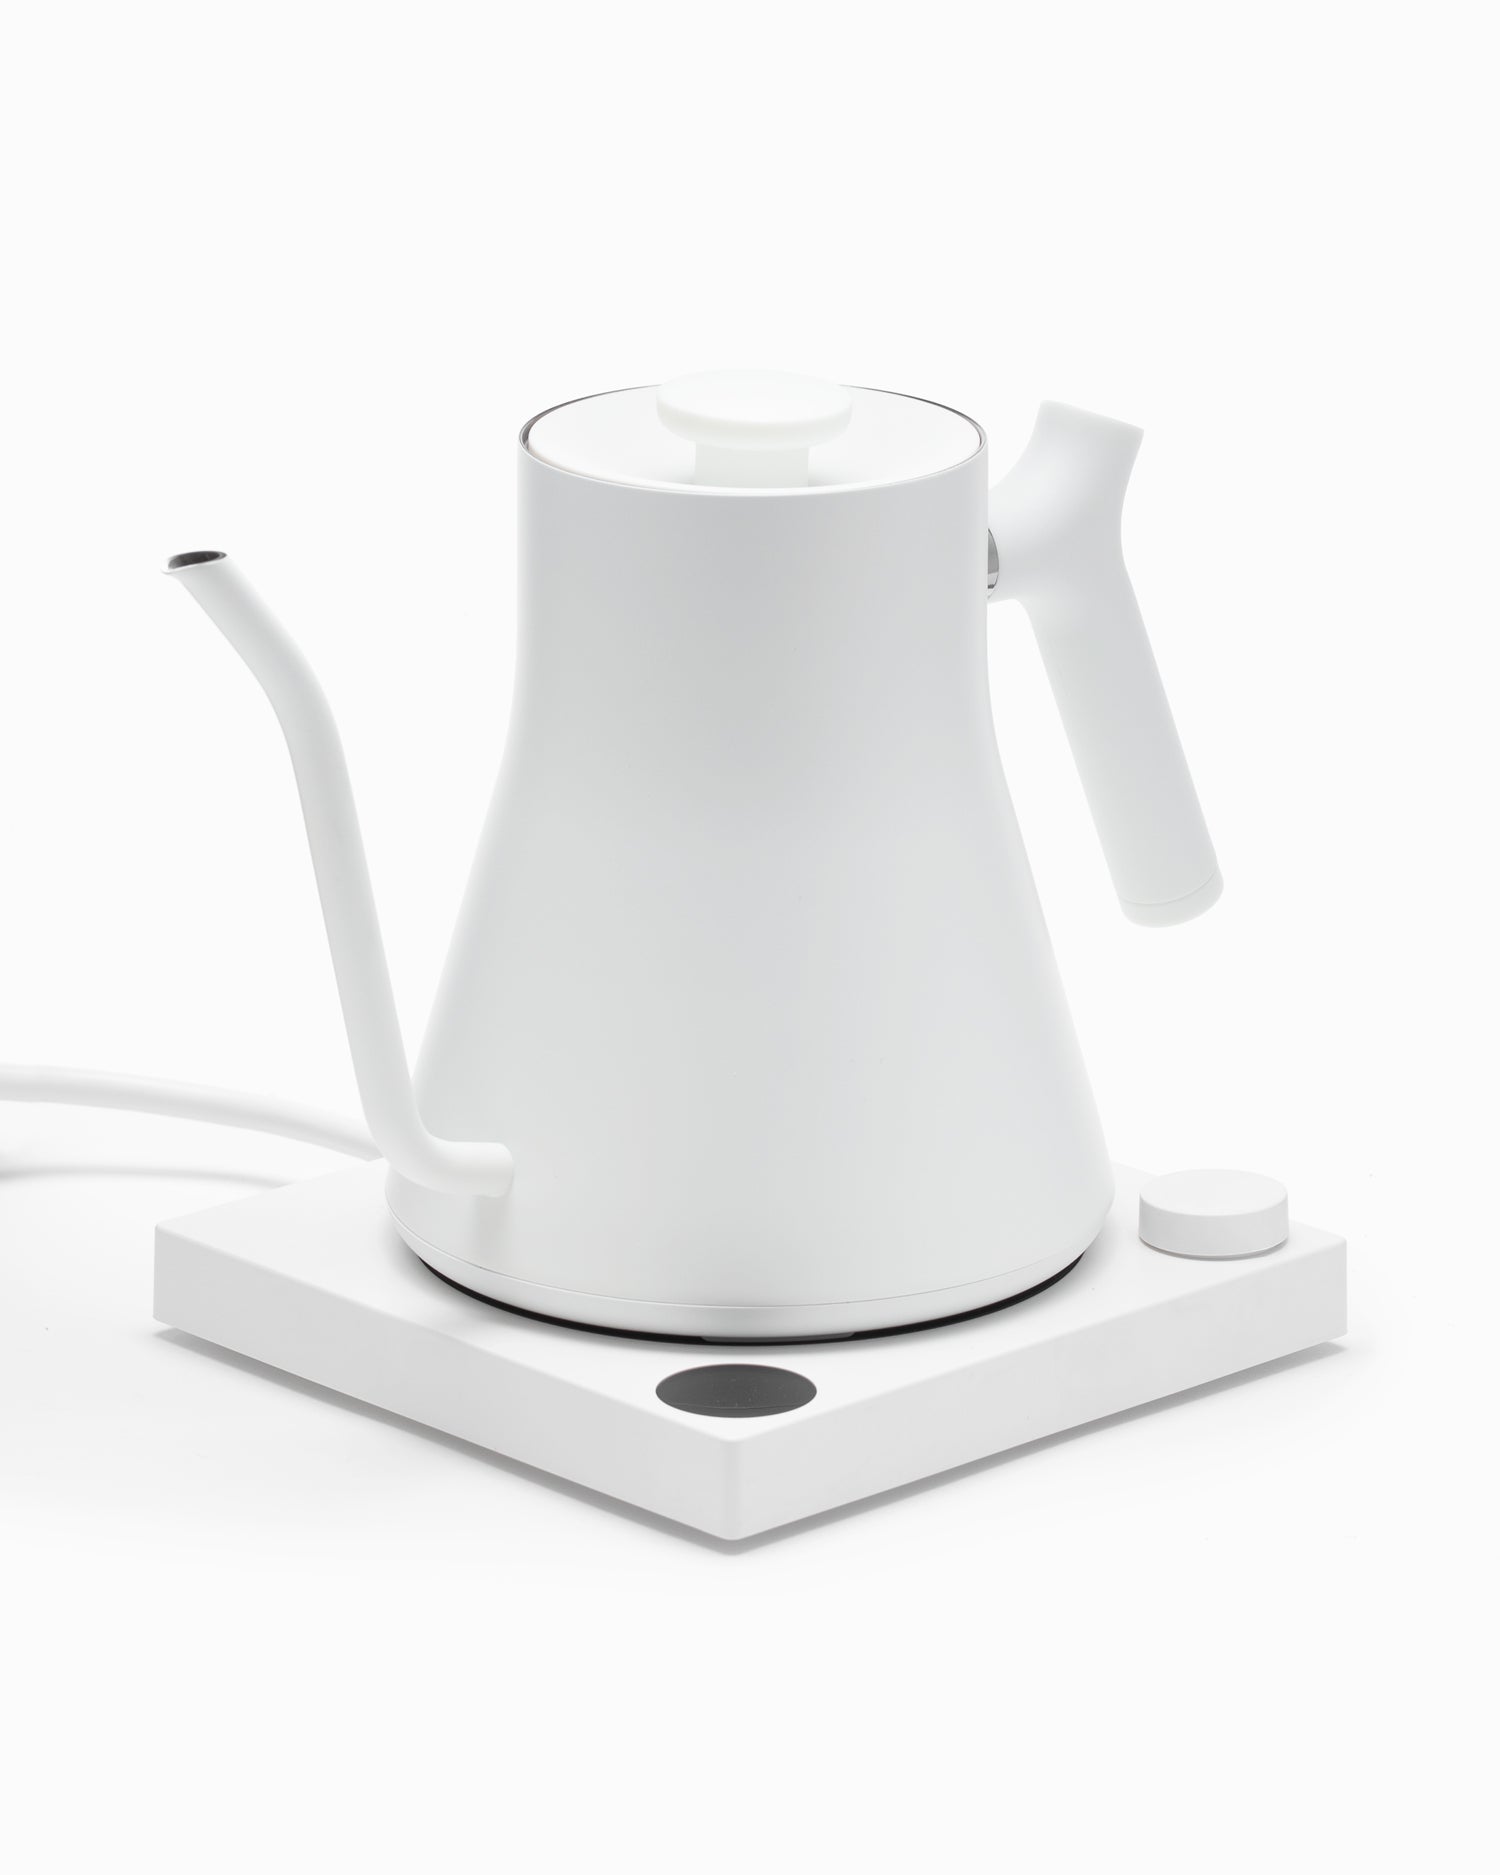 Can you use the Corvo EKG v1 Electric Kettle with a Stagg EKG v1